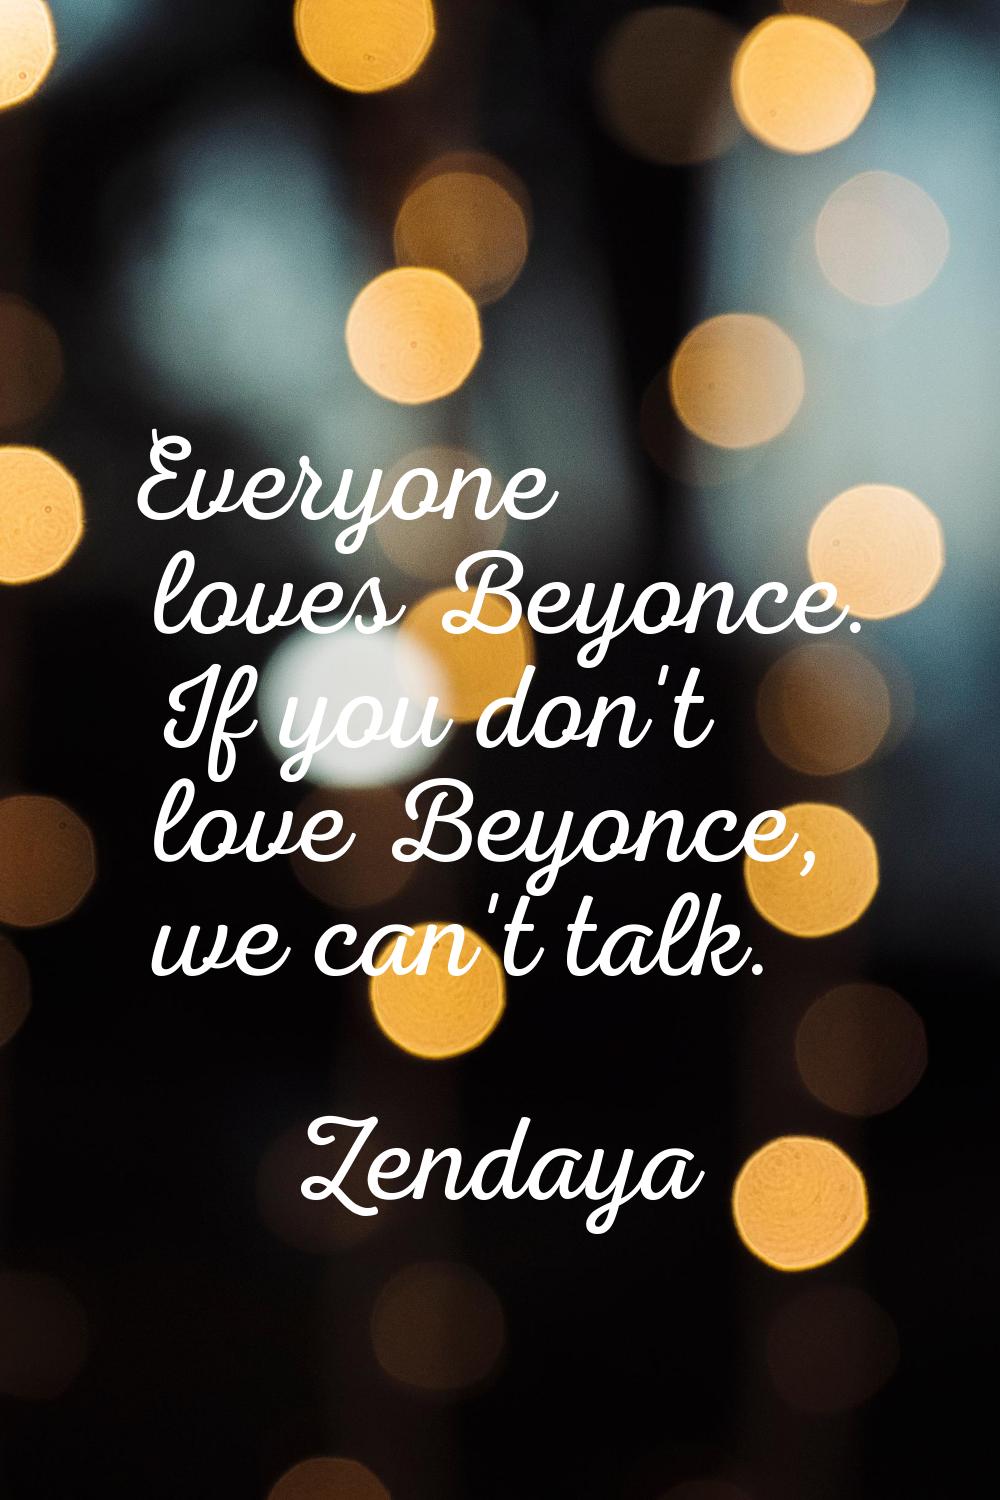 Everyone loves Beyonce. If you don't love Beyonce, we can't talk.